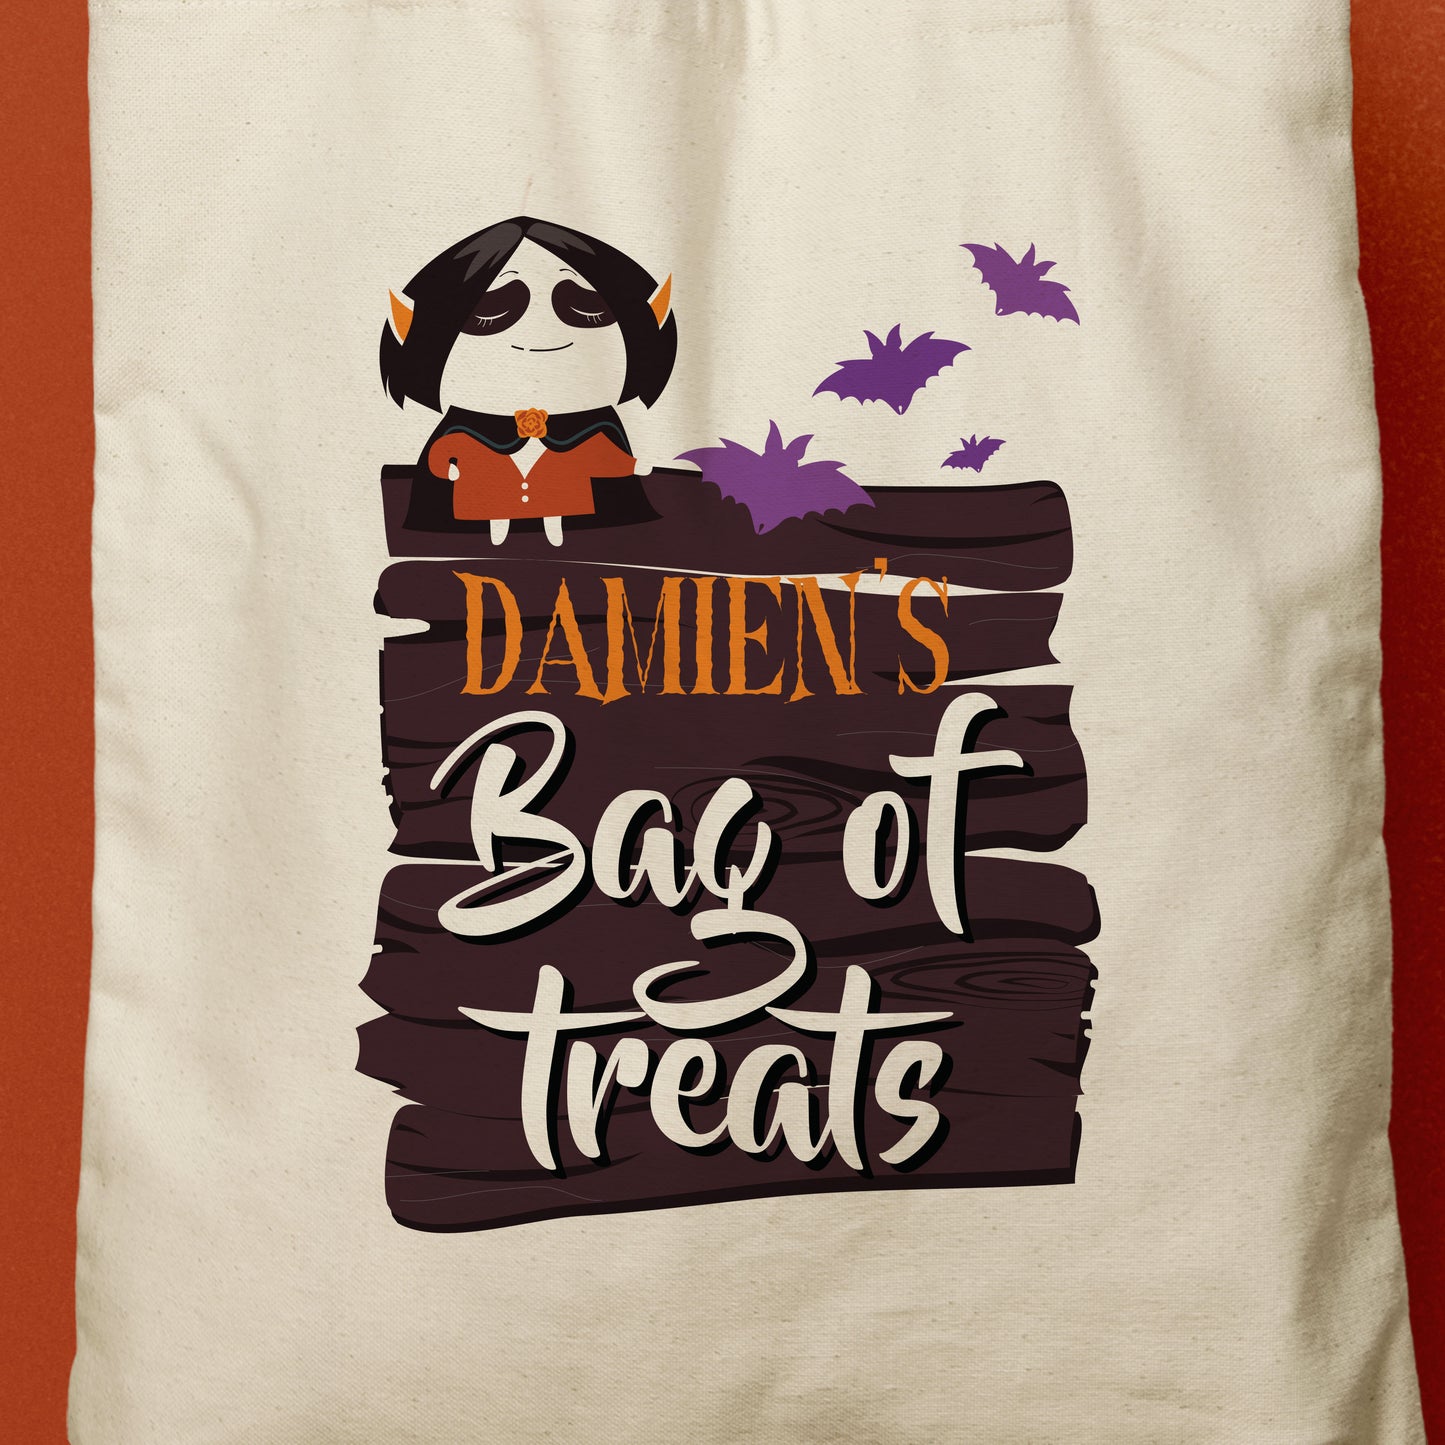 DAMIEN | Personalized Bag of Treats Canvas Tote